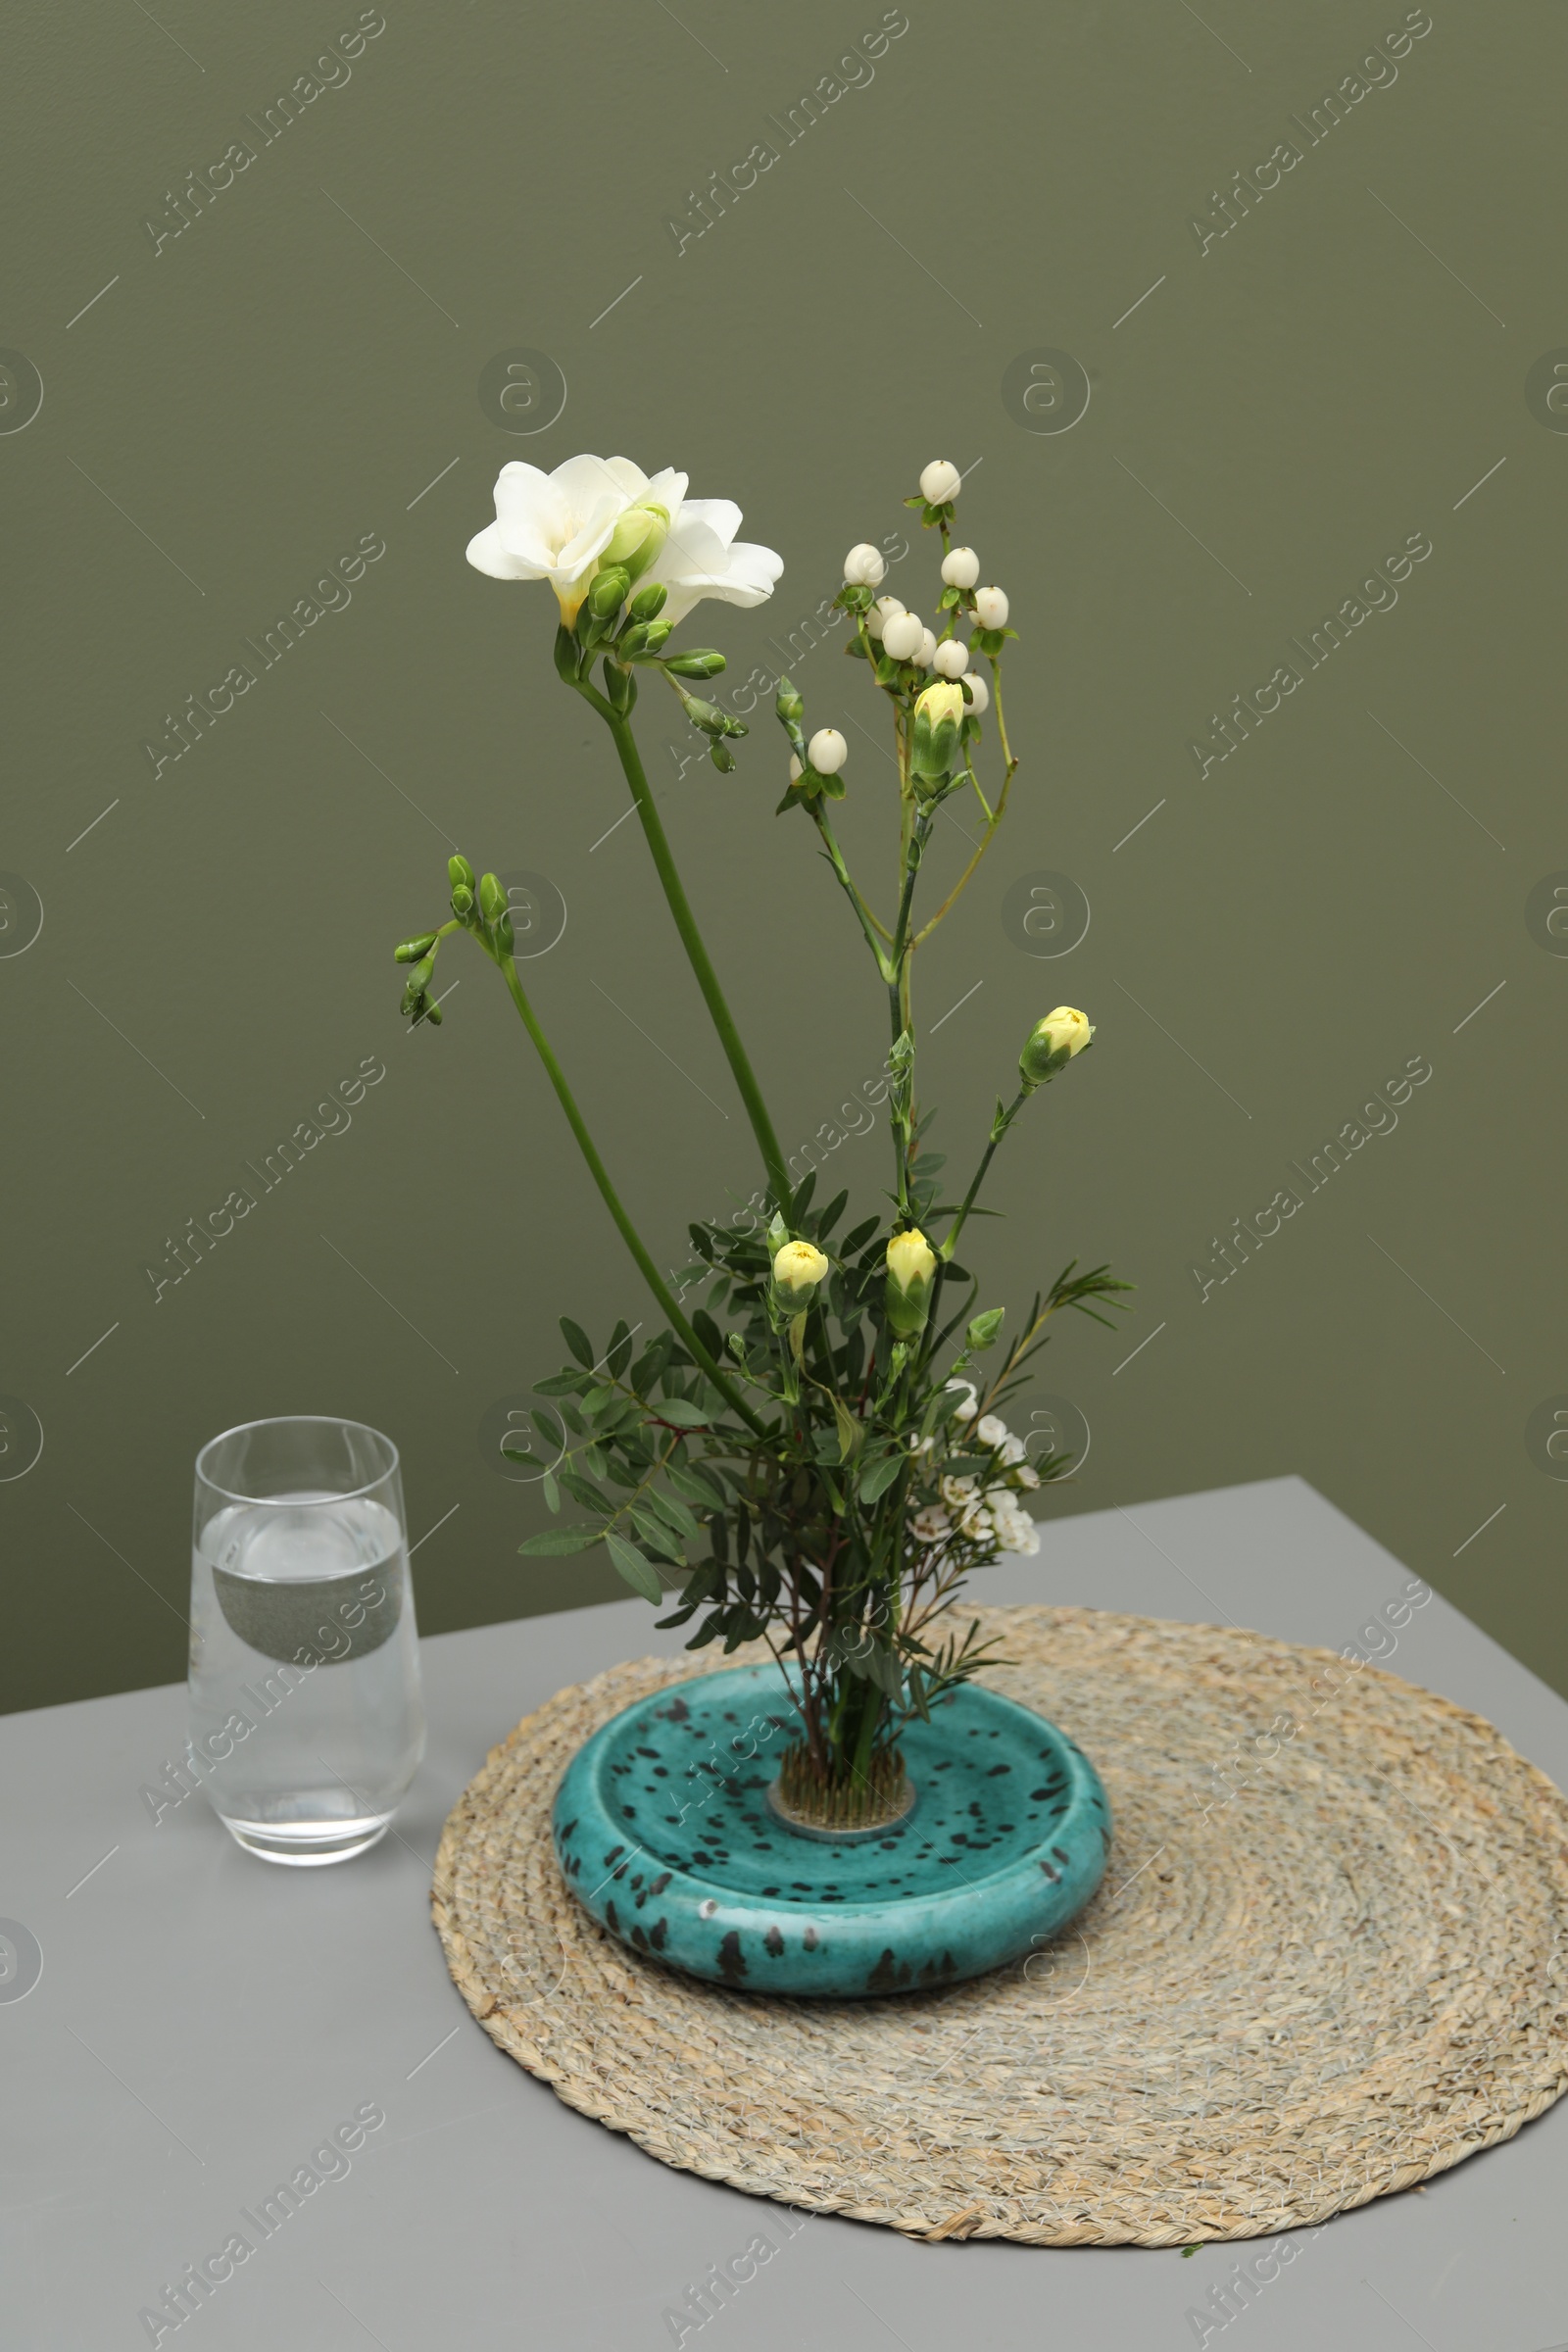 Photo of Stylish ikebana with beautiful flowers, green branches and glass of water on gray table near olive wall